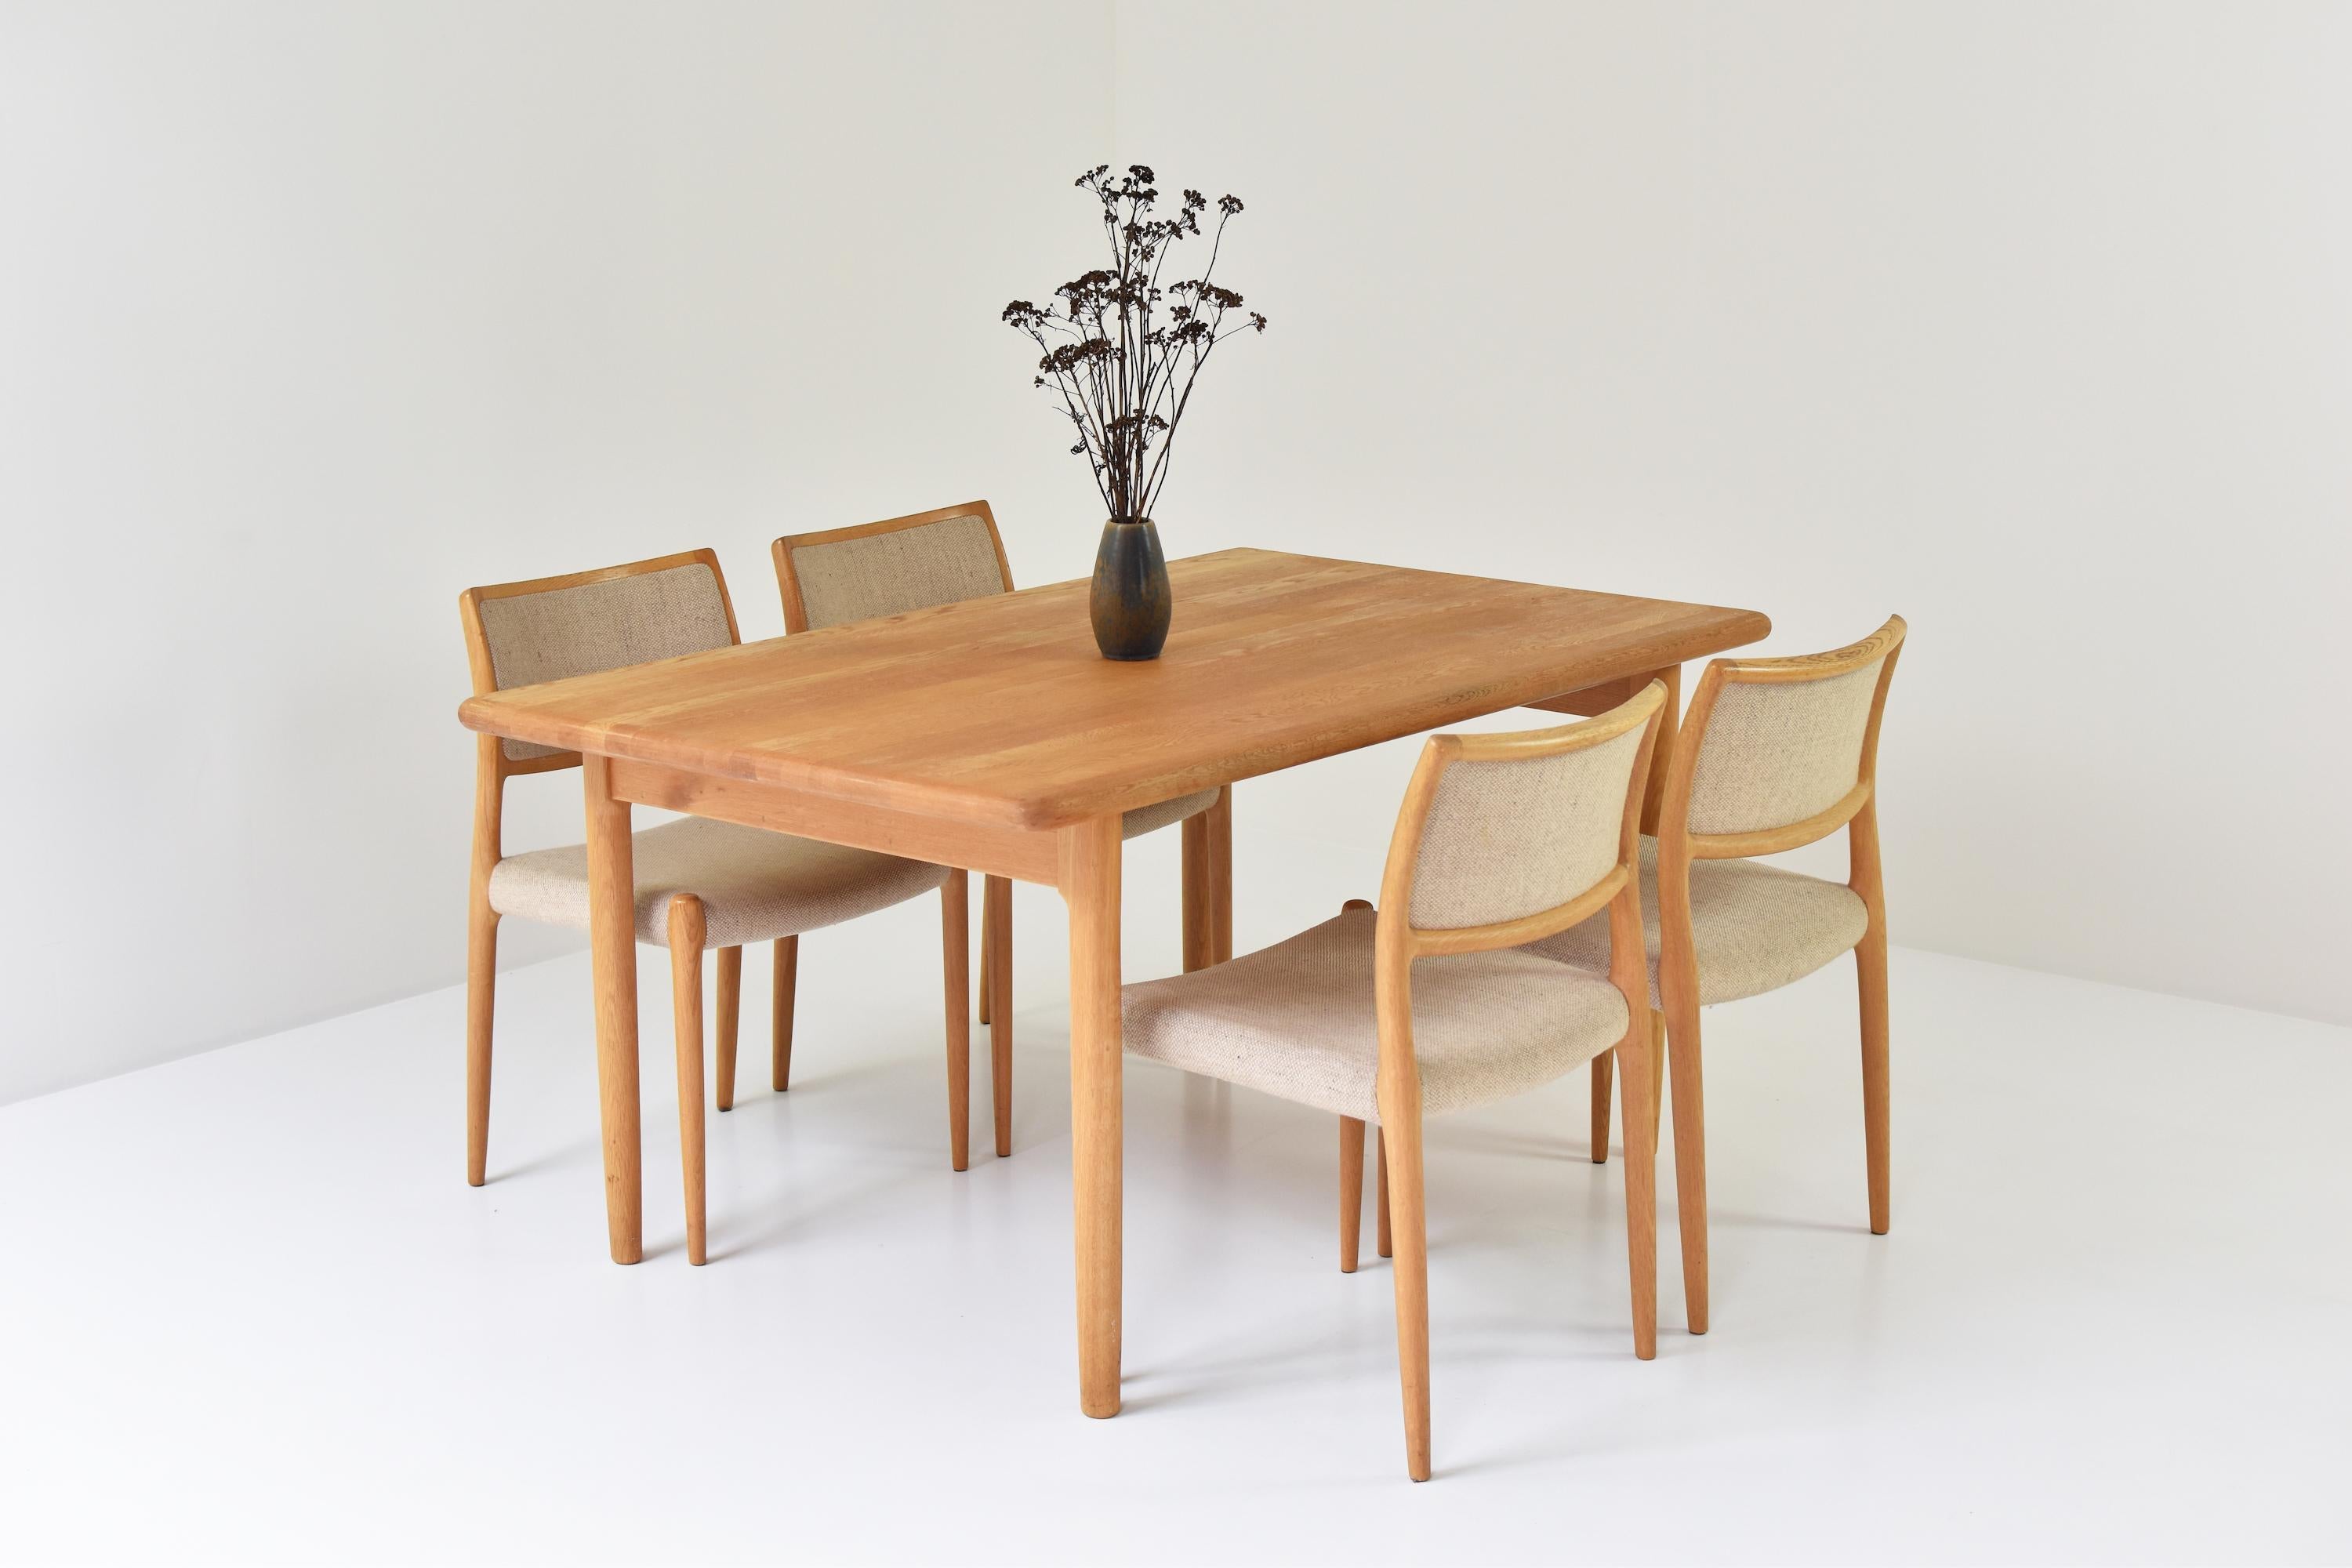 Dining table by Niels Otto Møller for J.L. Møller Møbelfabrik, Denmark 1954. Made out of solid oak and in good original condition. Labeled underneath. The set of 4 matching dining chairs are sold. 

Measurements
H 75 x W 150 x D 90 cm.